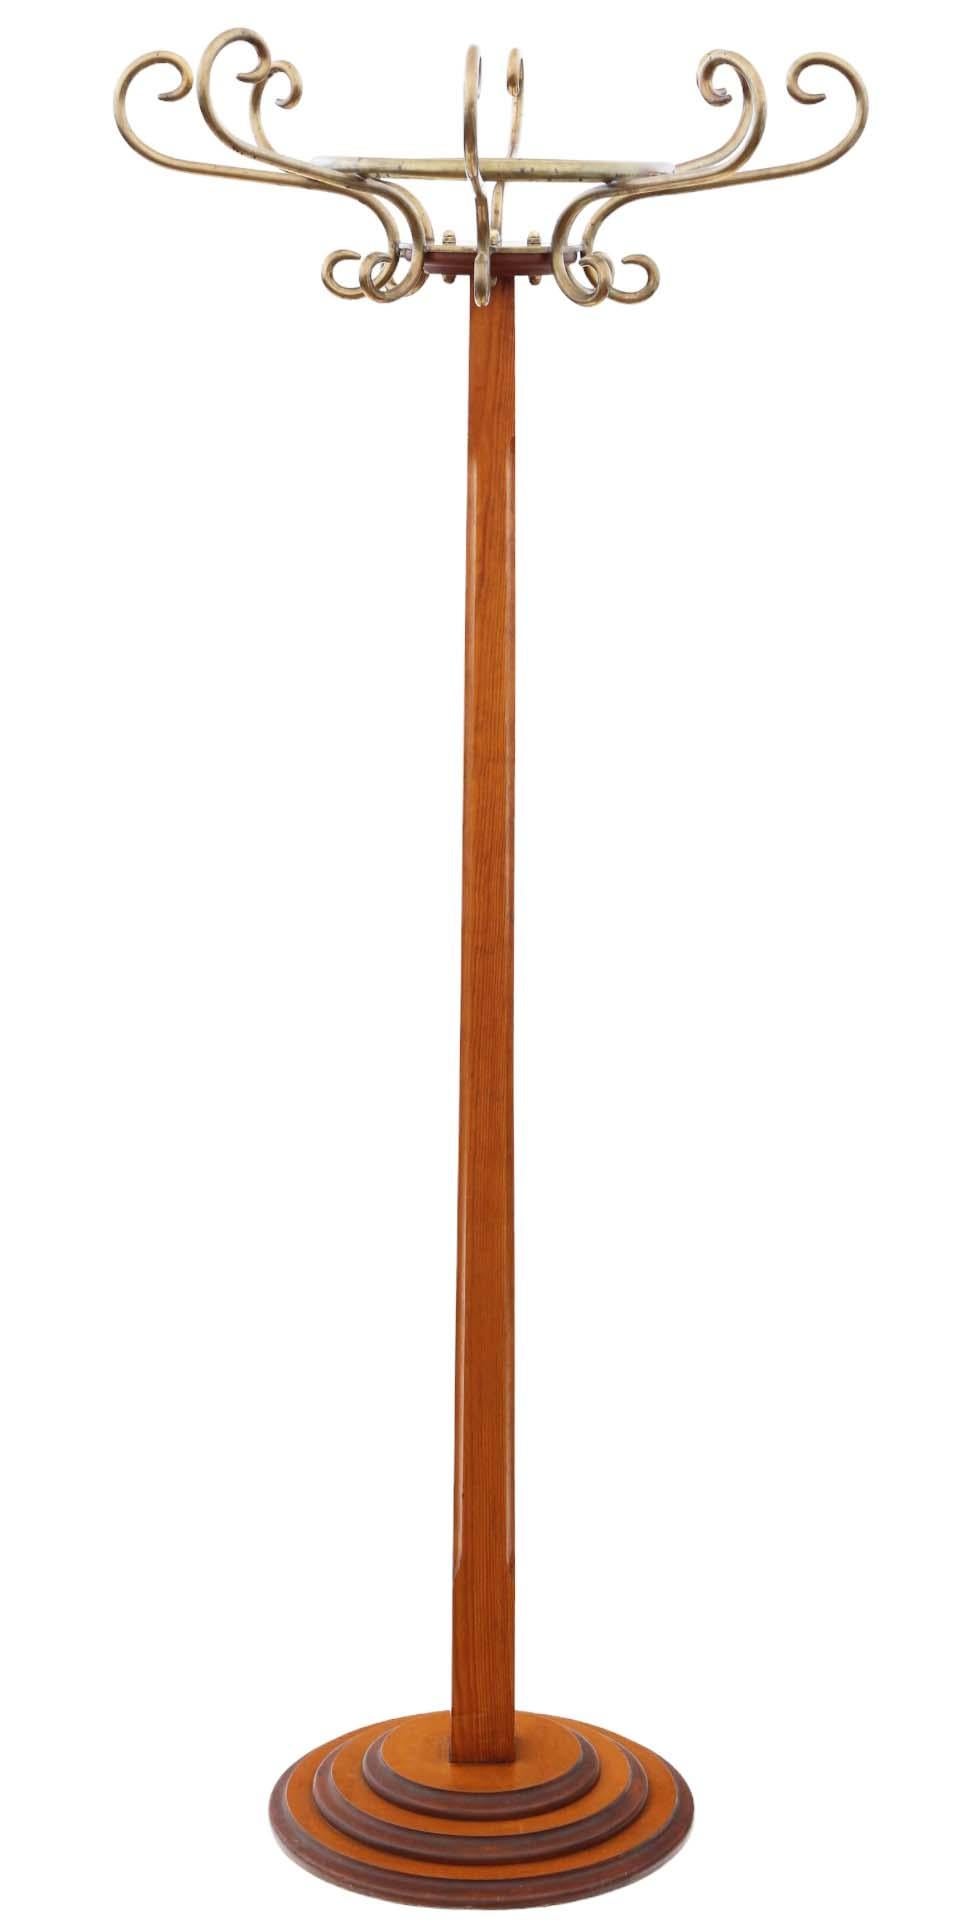 Vintage Retro Large Quality Mixed Wood and Brass Hall Stand - Art Deco Style Coat/Hat Rack dating from the mid-20th Century.

This piece boasts solid and robust construction, displaying no loose joints or woodworm. It stands out as a real statement